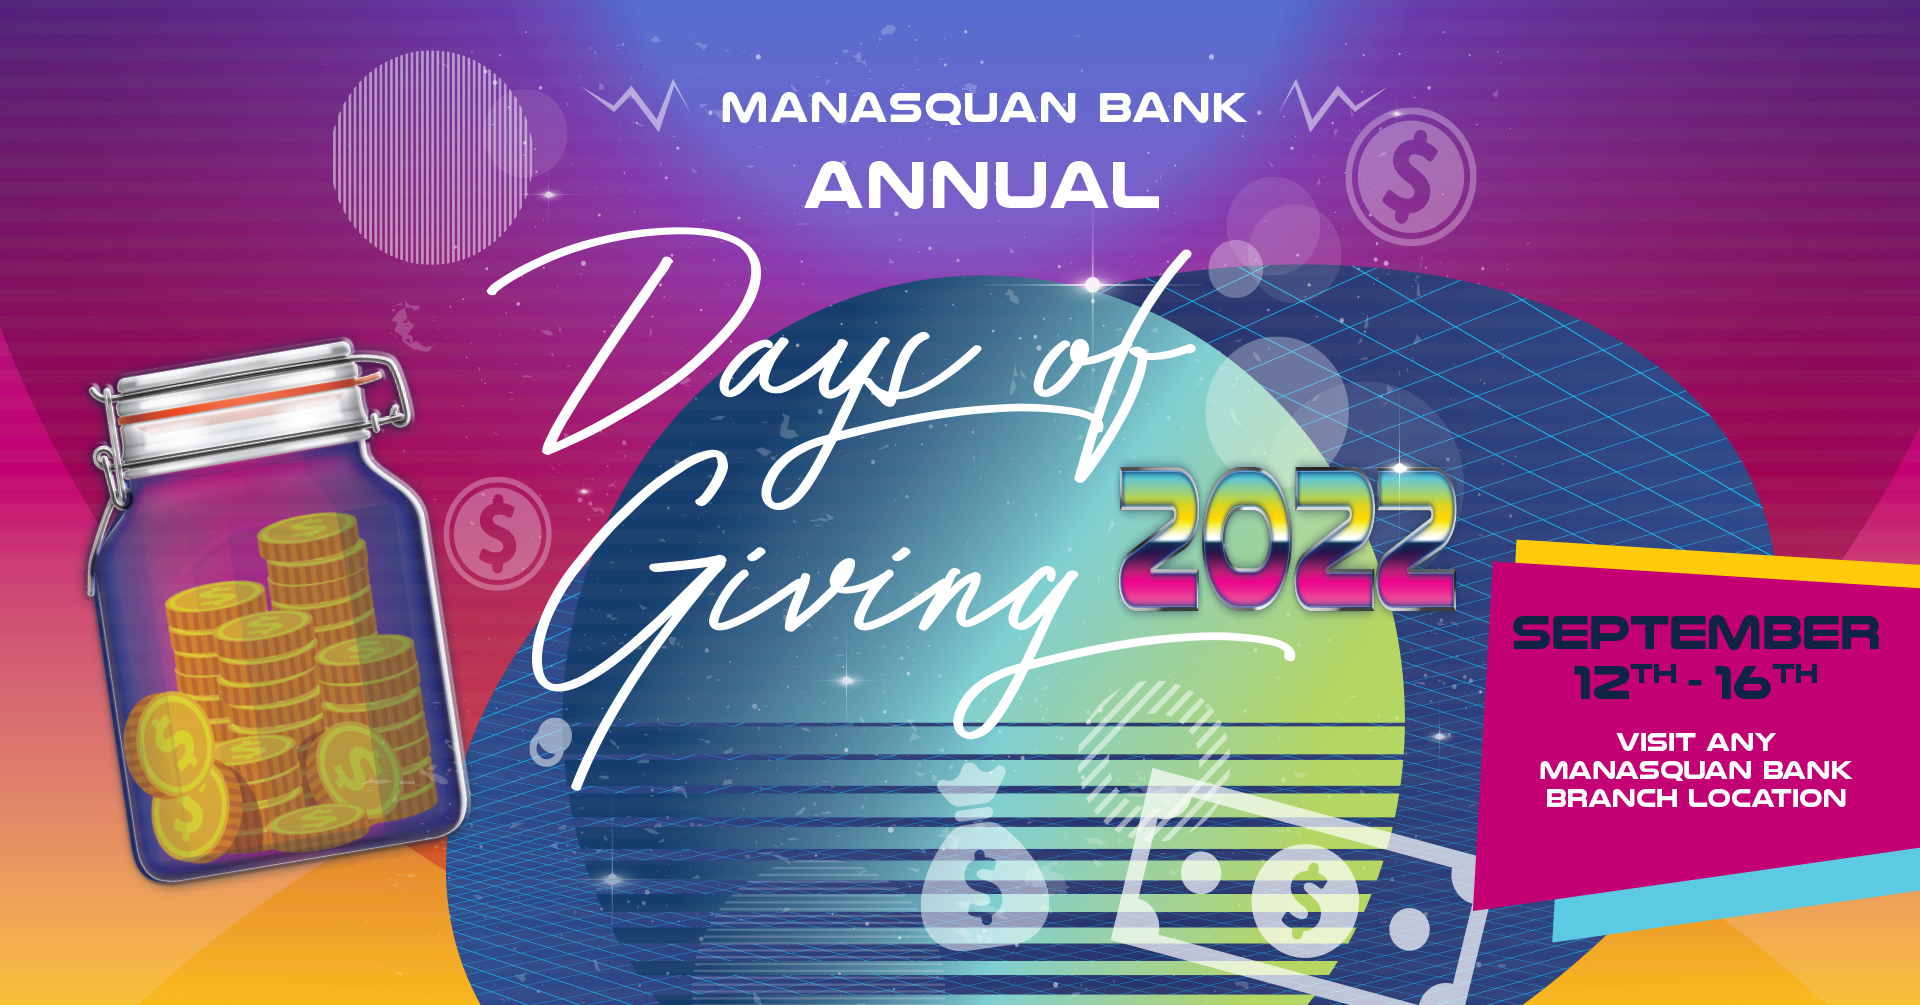 Annual Days of Giving is Back!